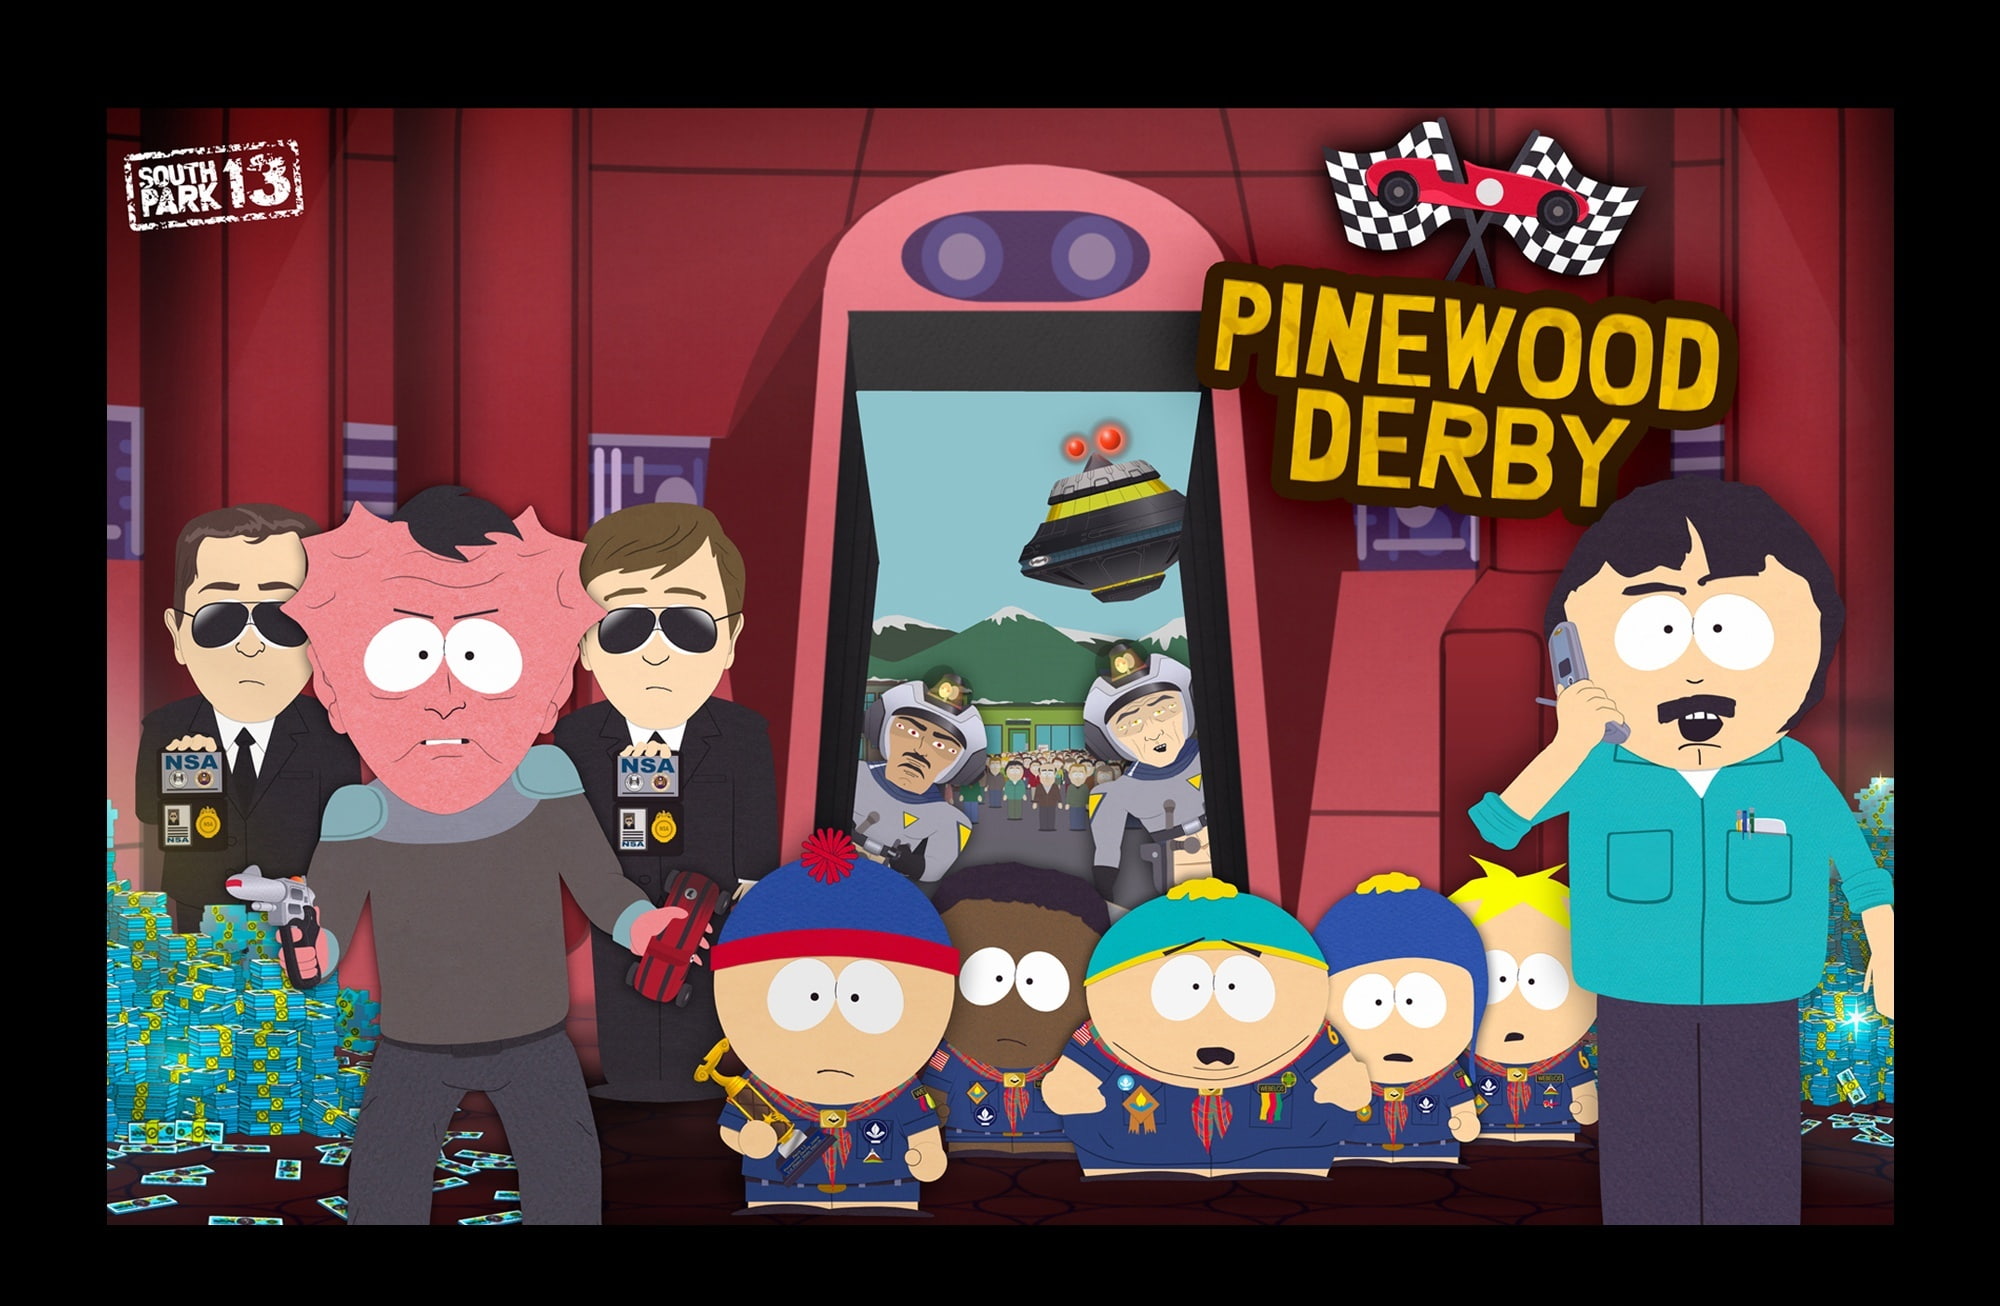 South Park - Pinewood Derby, Pinewood Derby wallpaper, Cartoons